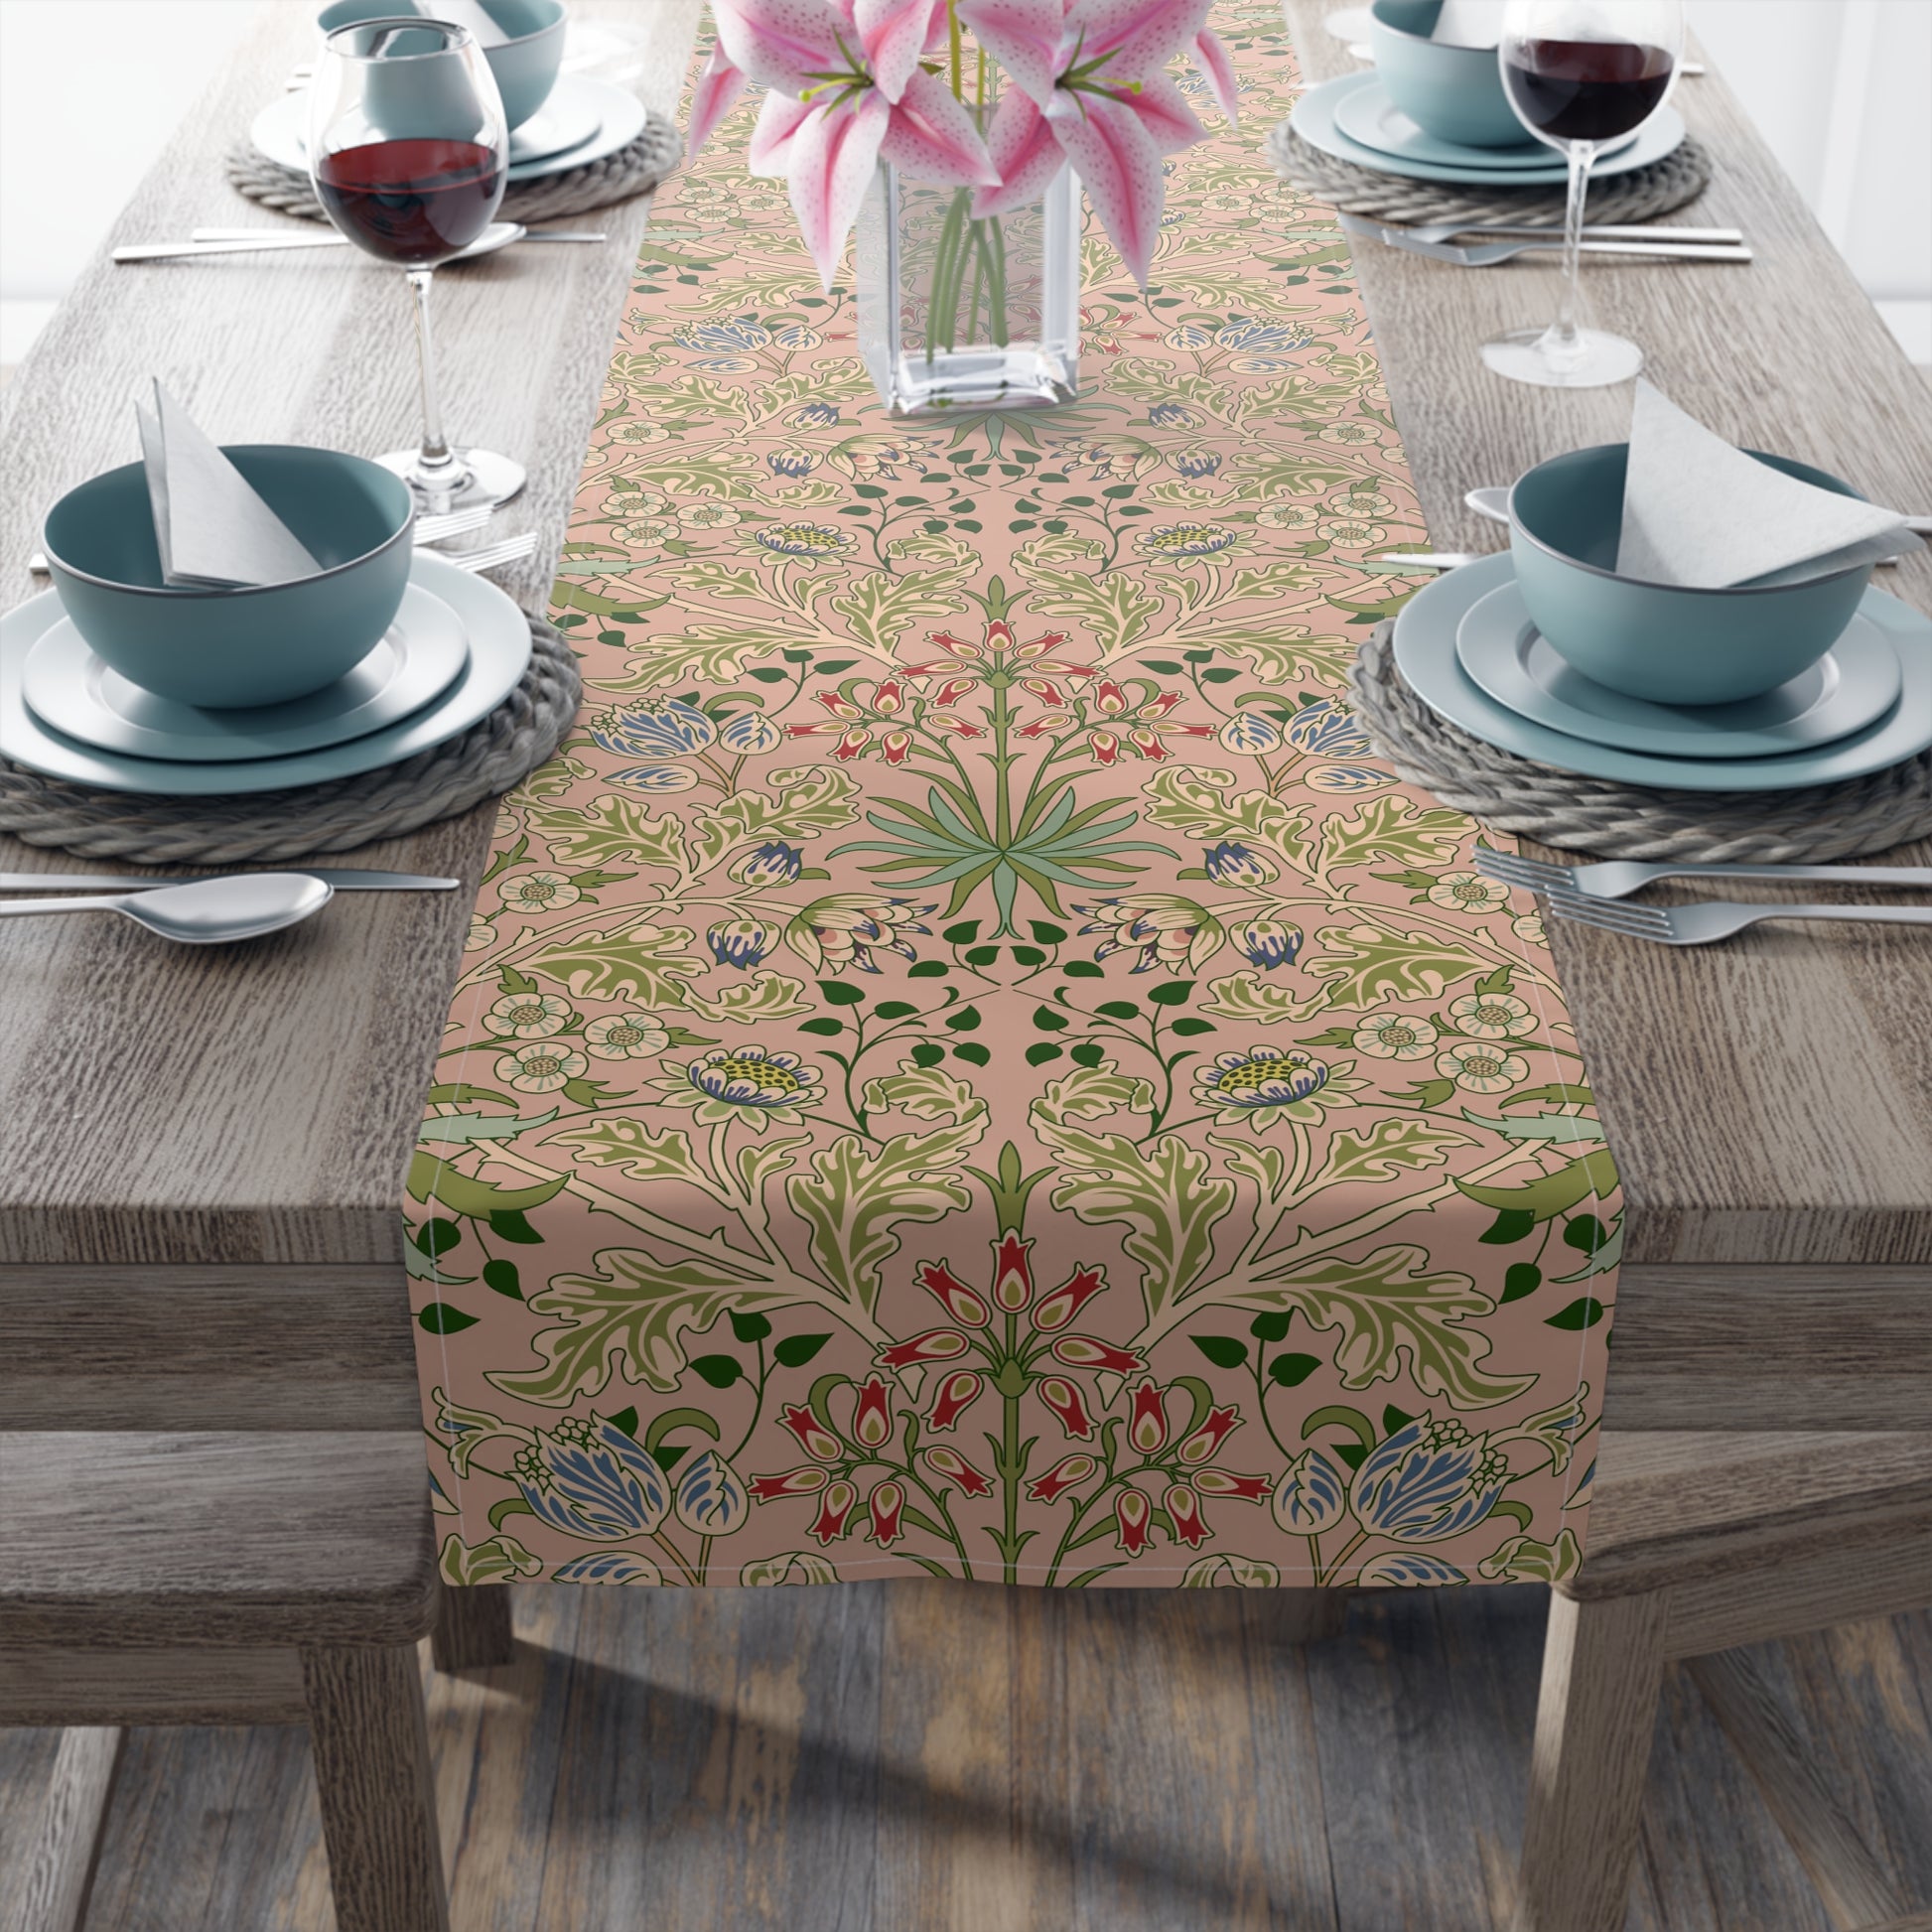 william-morris-co-table-runner-hyacinth-collection-blossom-3